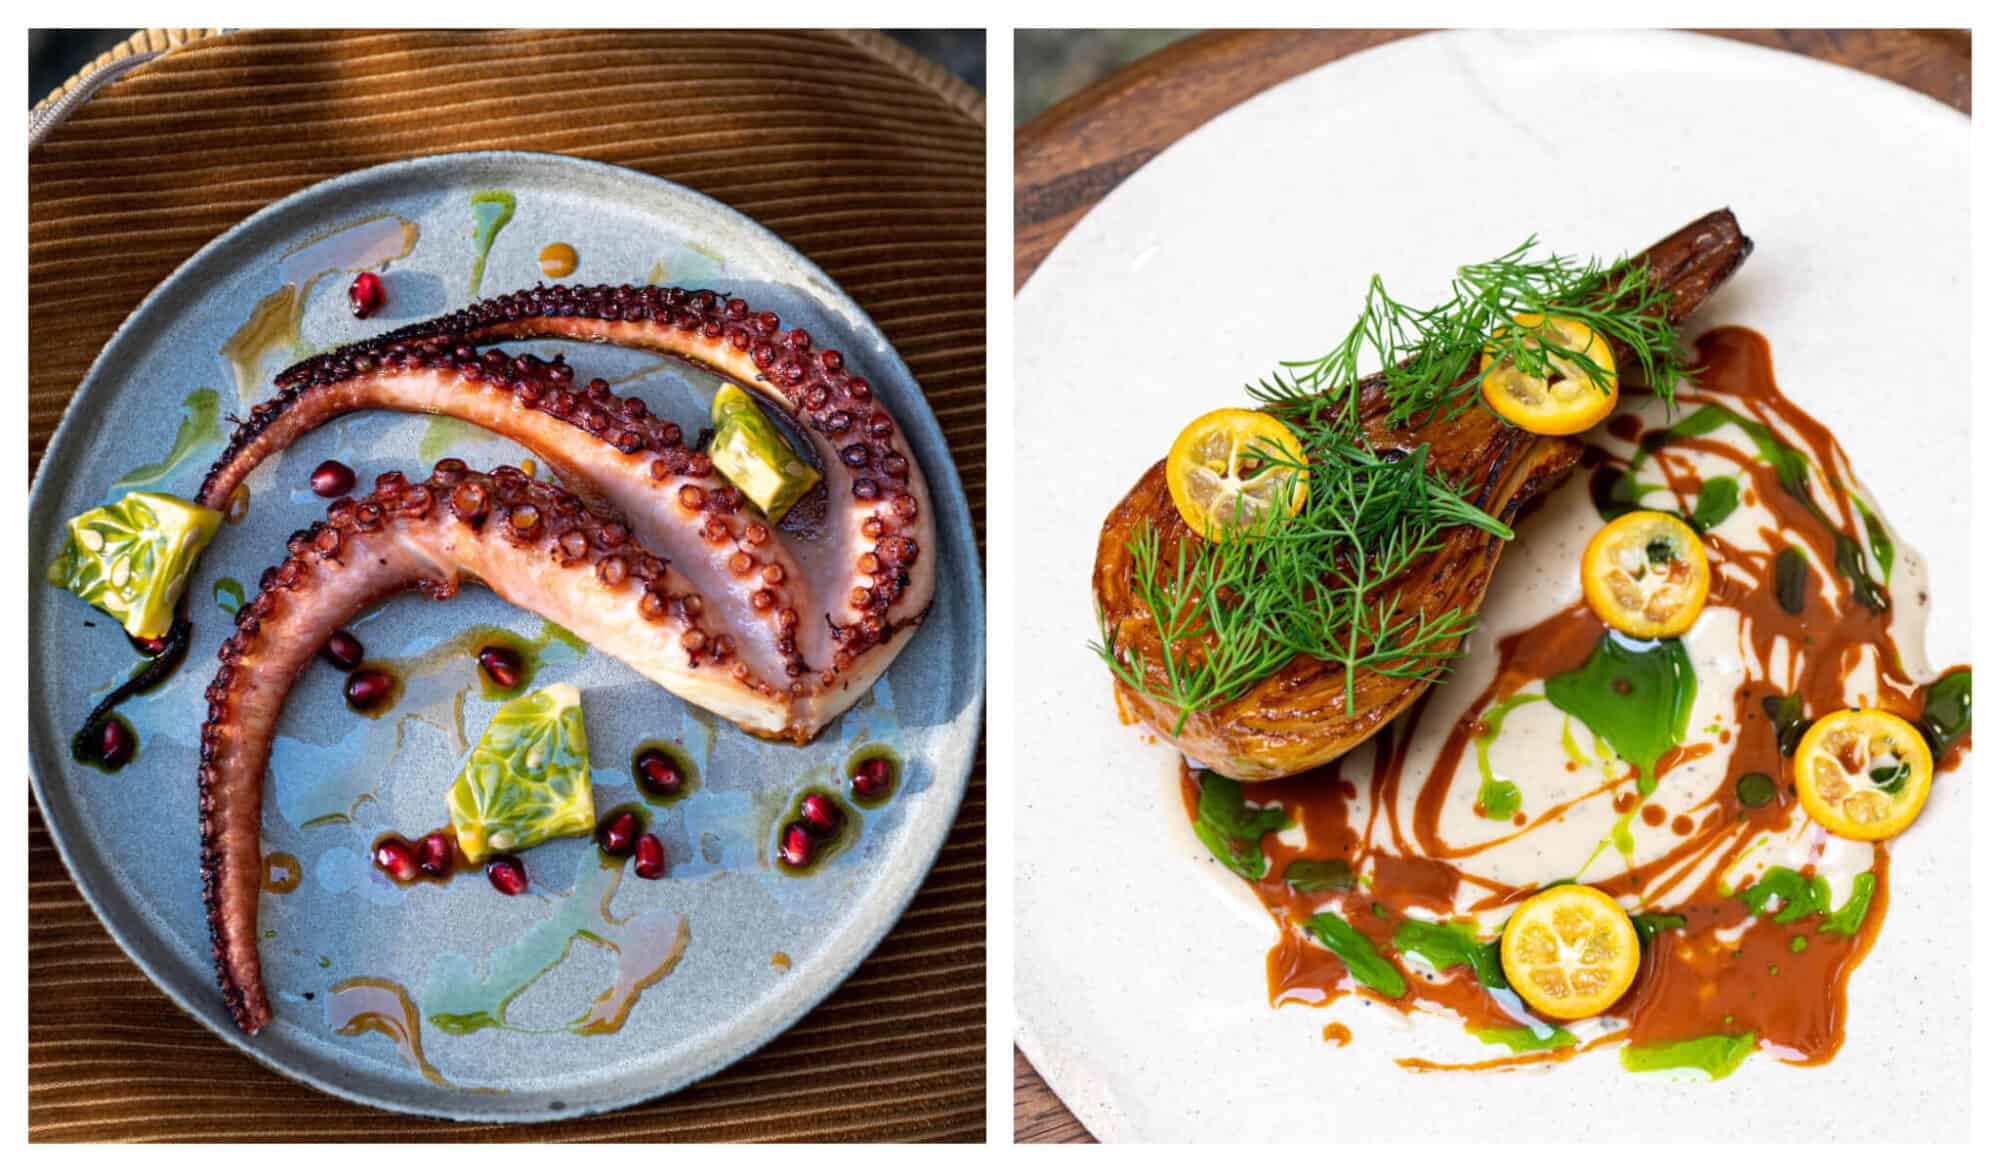 Left: A plate of octopus, garnished with pomegranate, light oil, and some greens, Right: caramelized endives with a garnish of lemons and green and brown sauce artfully drizzled around the plate.